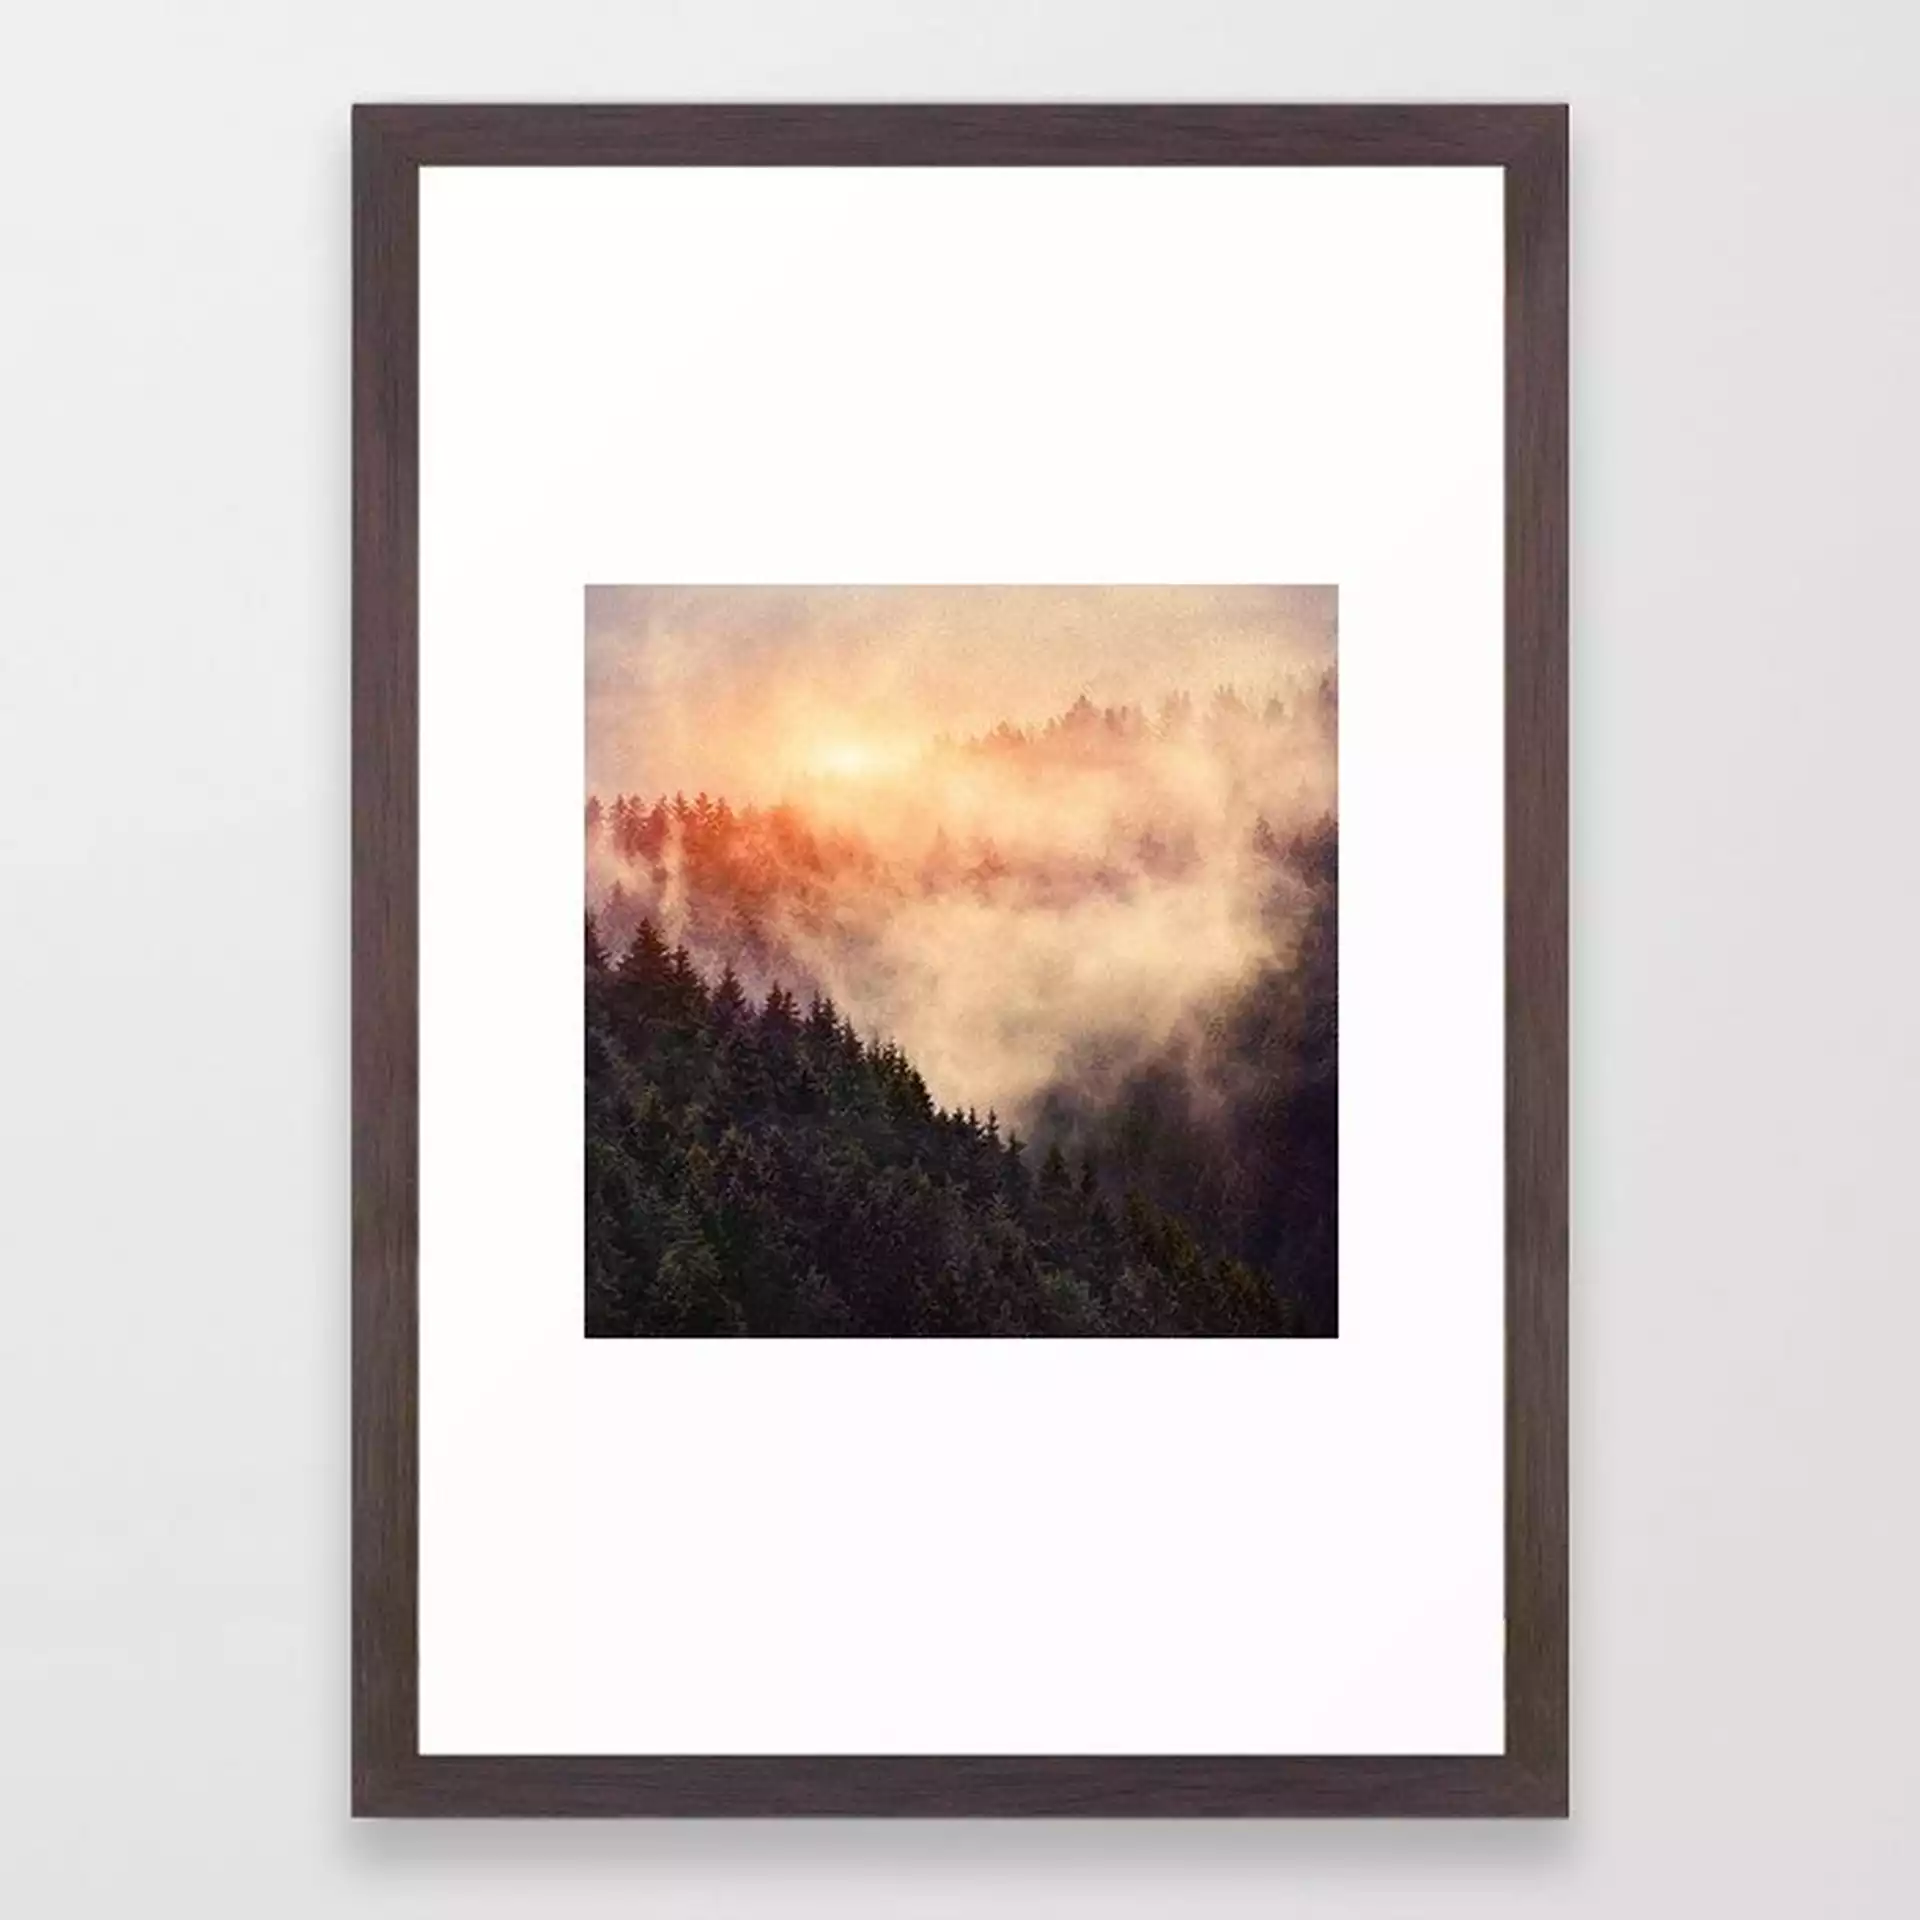 In My Other World Framed Art Print by Tordis Kayma - Conservation Walnut - SMALL-15x21